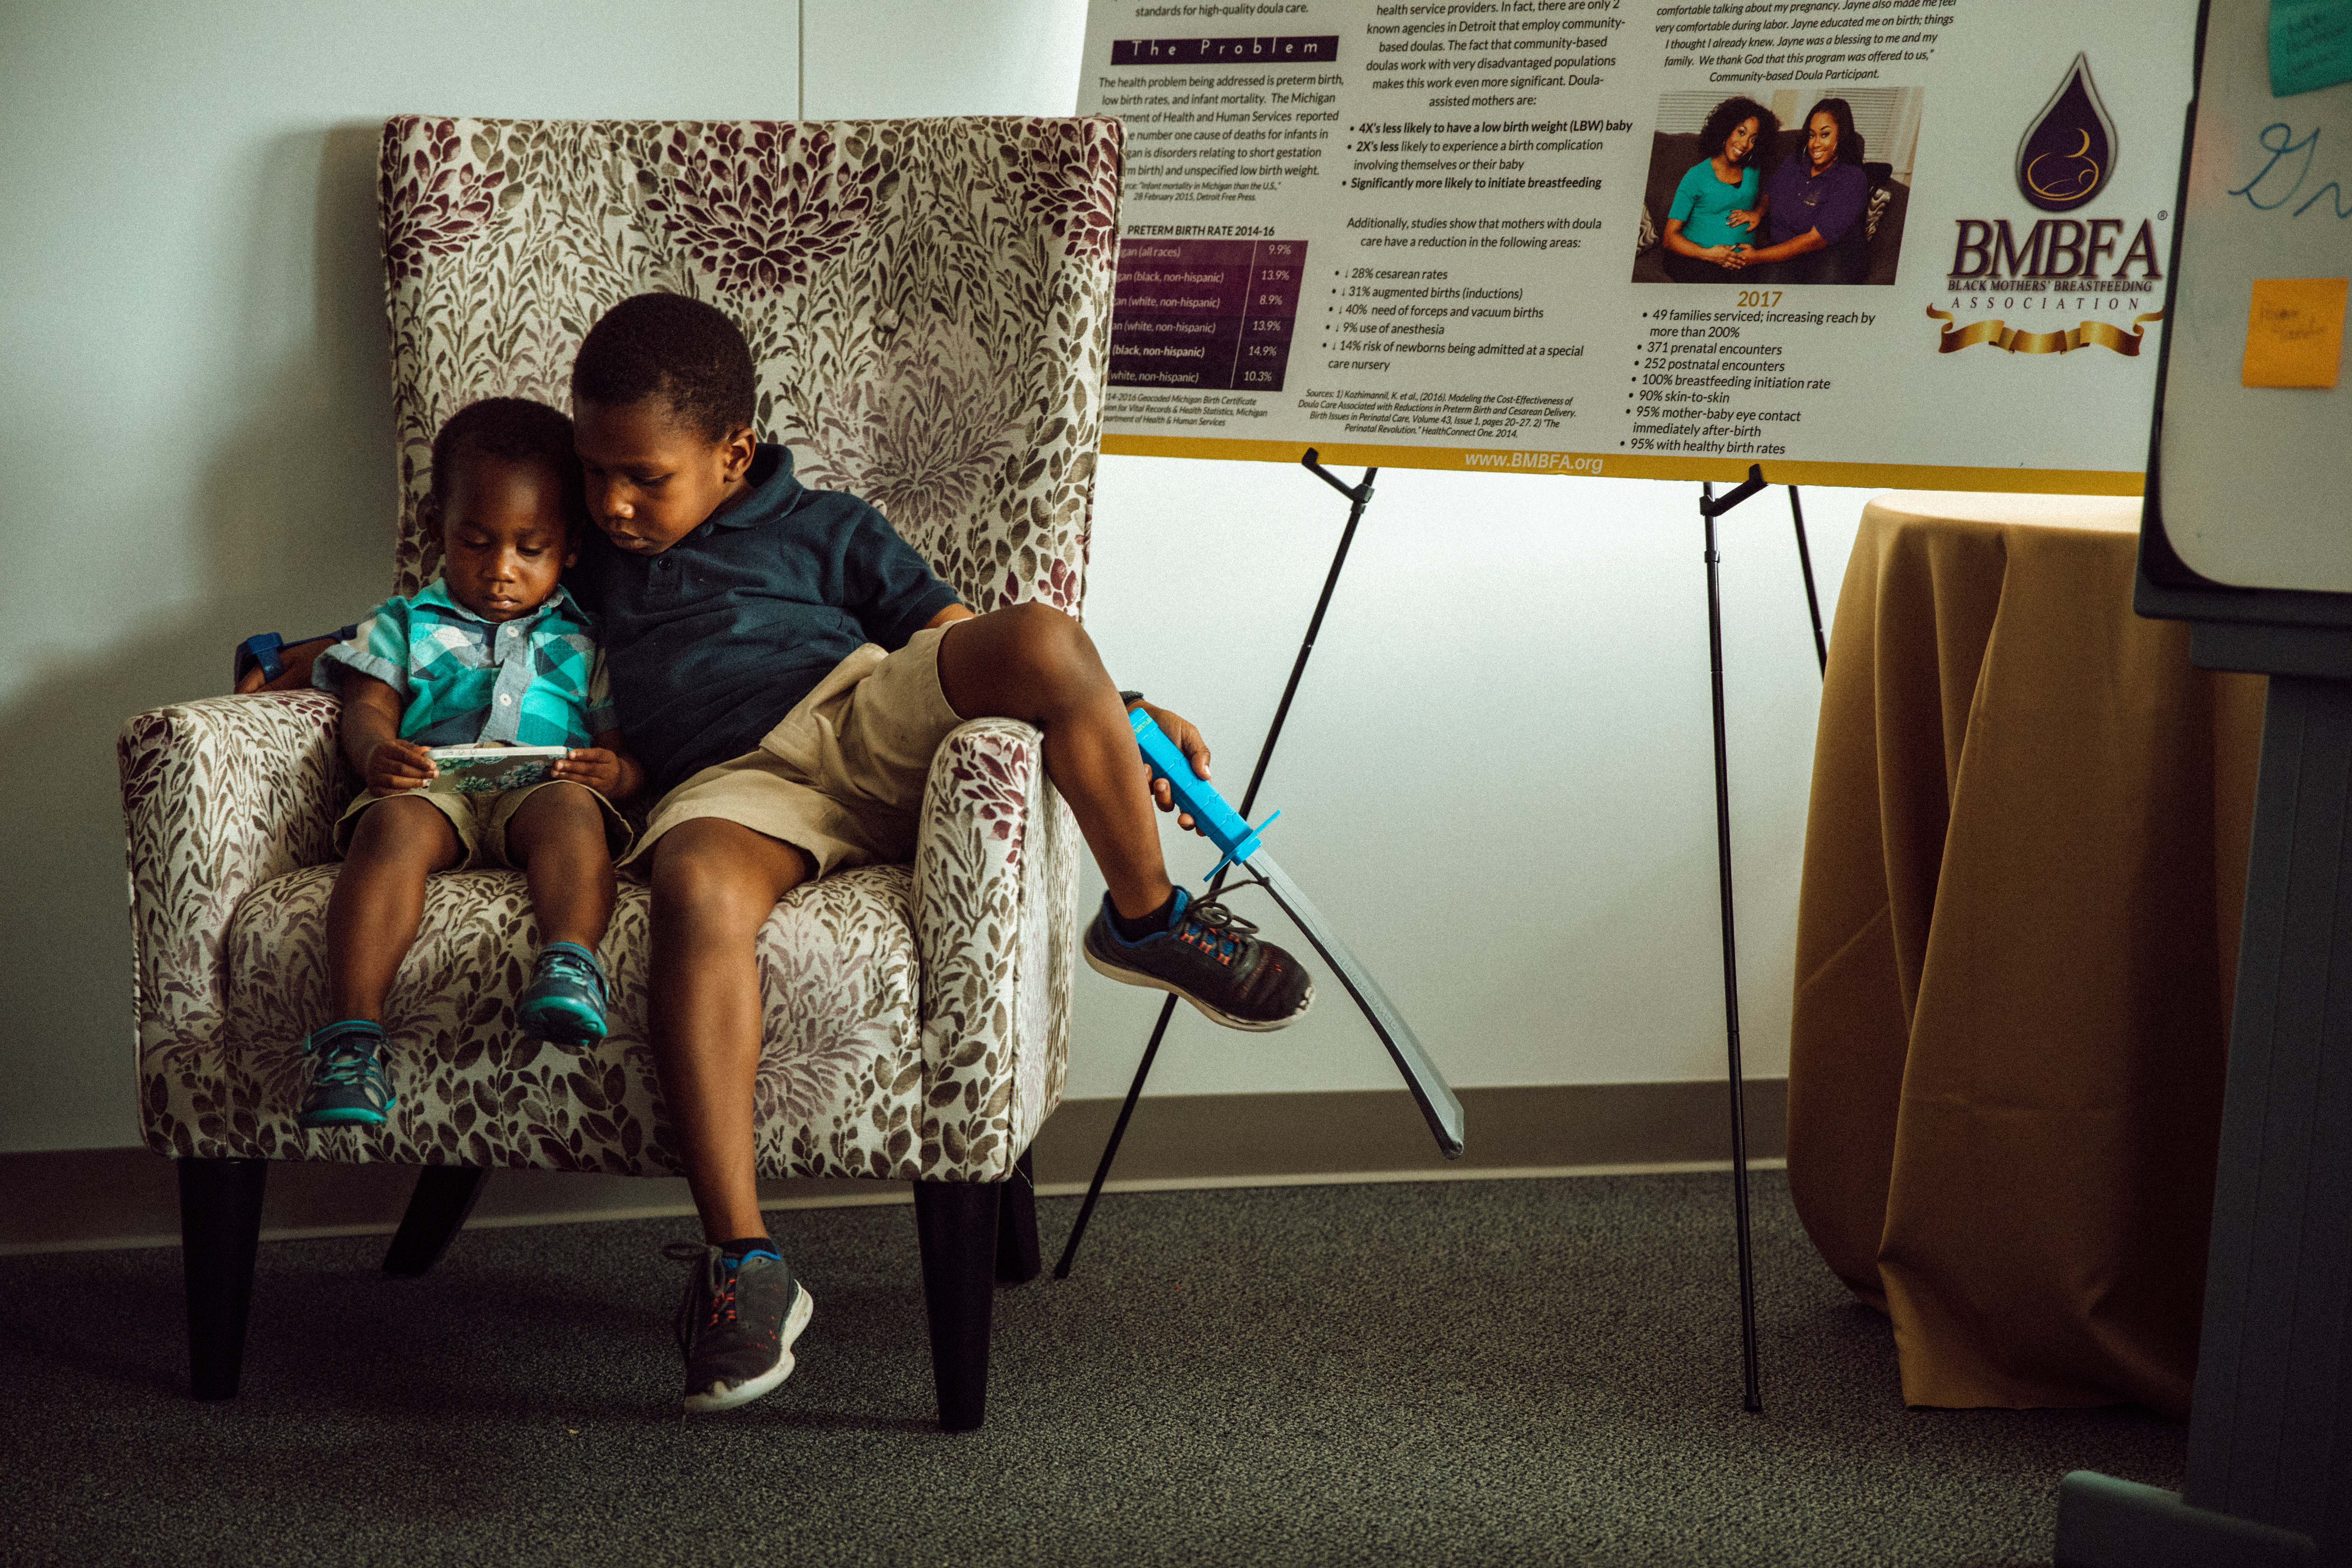 Malikah Garner's two sons sitting on a chair in an office and playing on a electronic device.